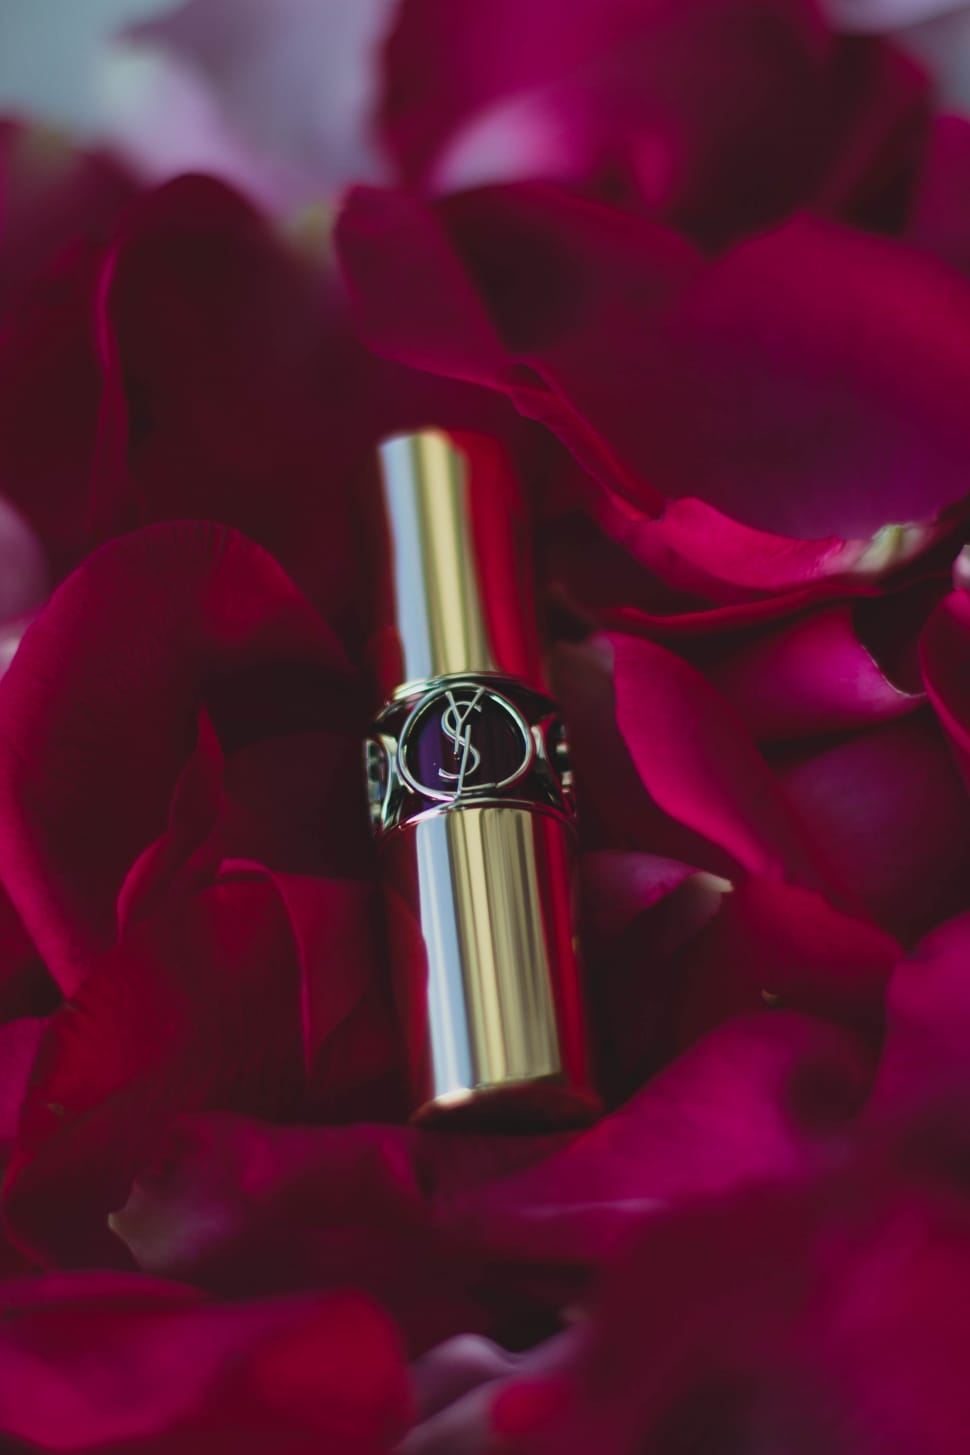 Yves Saint Laurent Lipstick Surrounded With Red Rose Petals